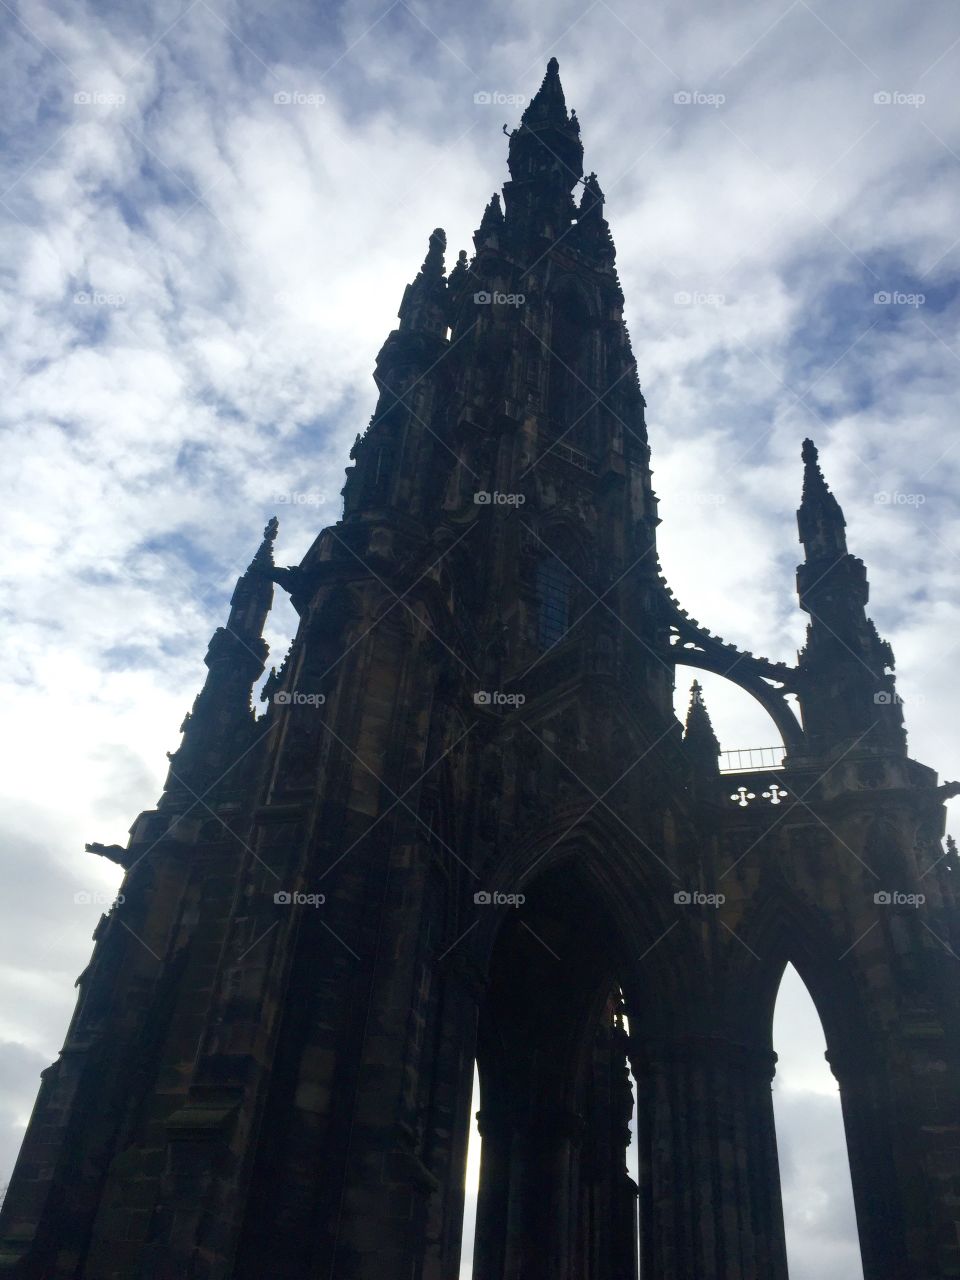 Looking up at the Scott Monument